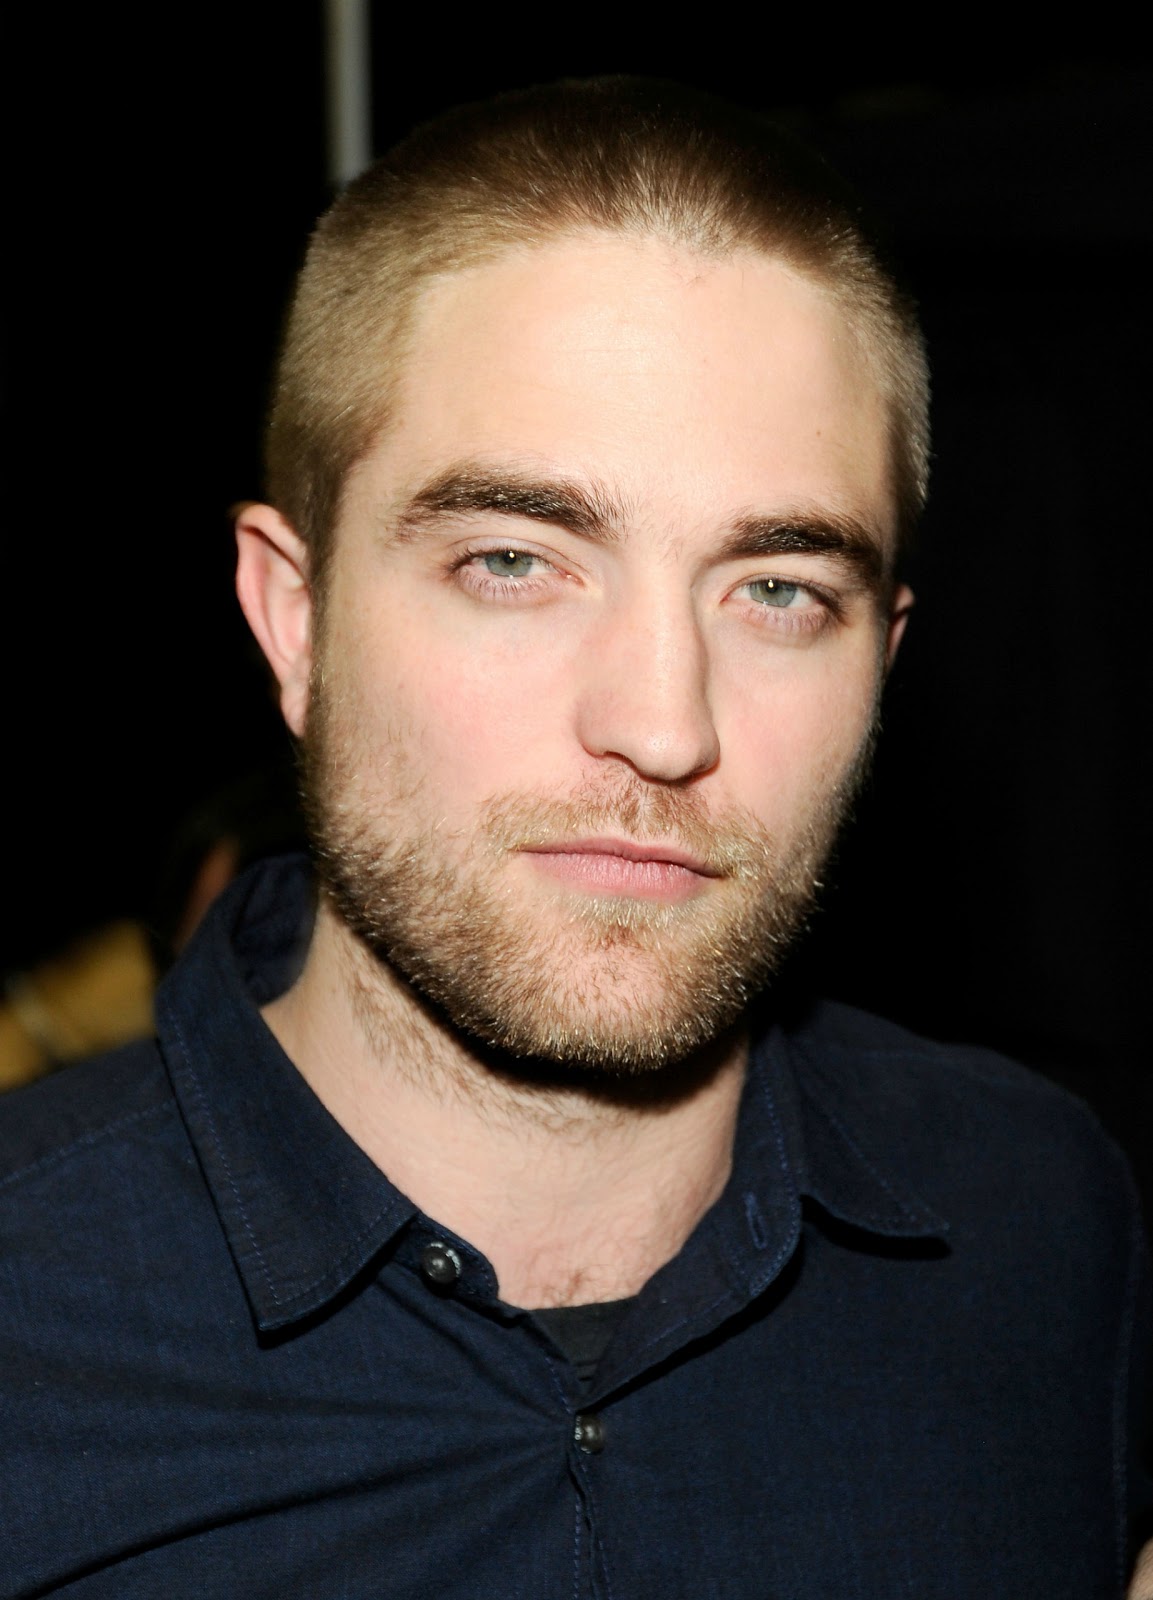 Robert Pattinson Profile and New Photos-Images 2012 | All About Hollywood1153 x 1600